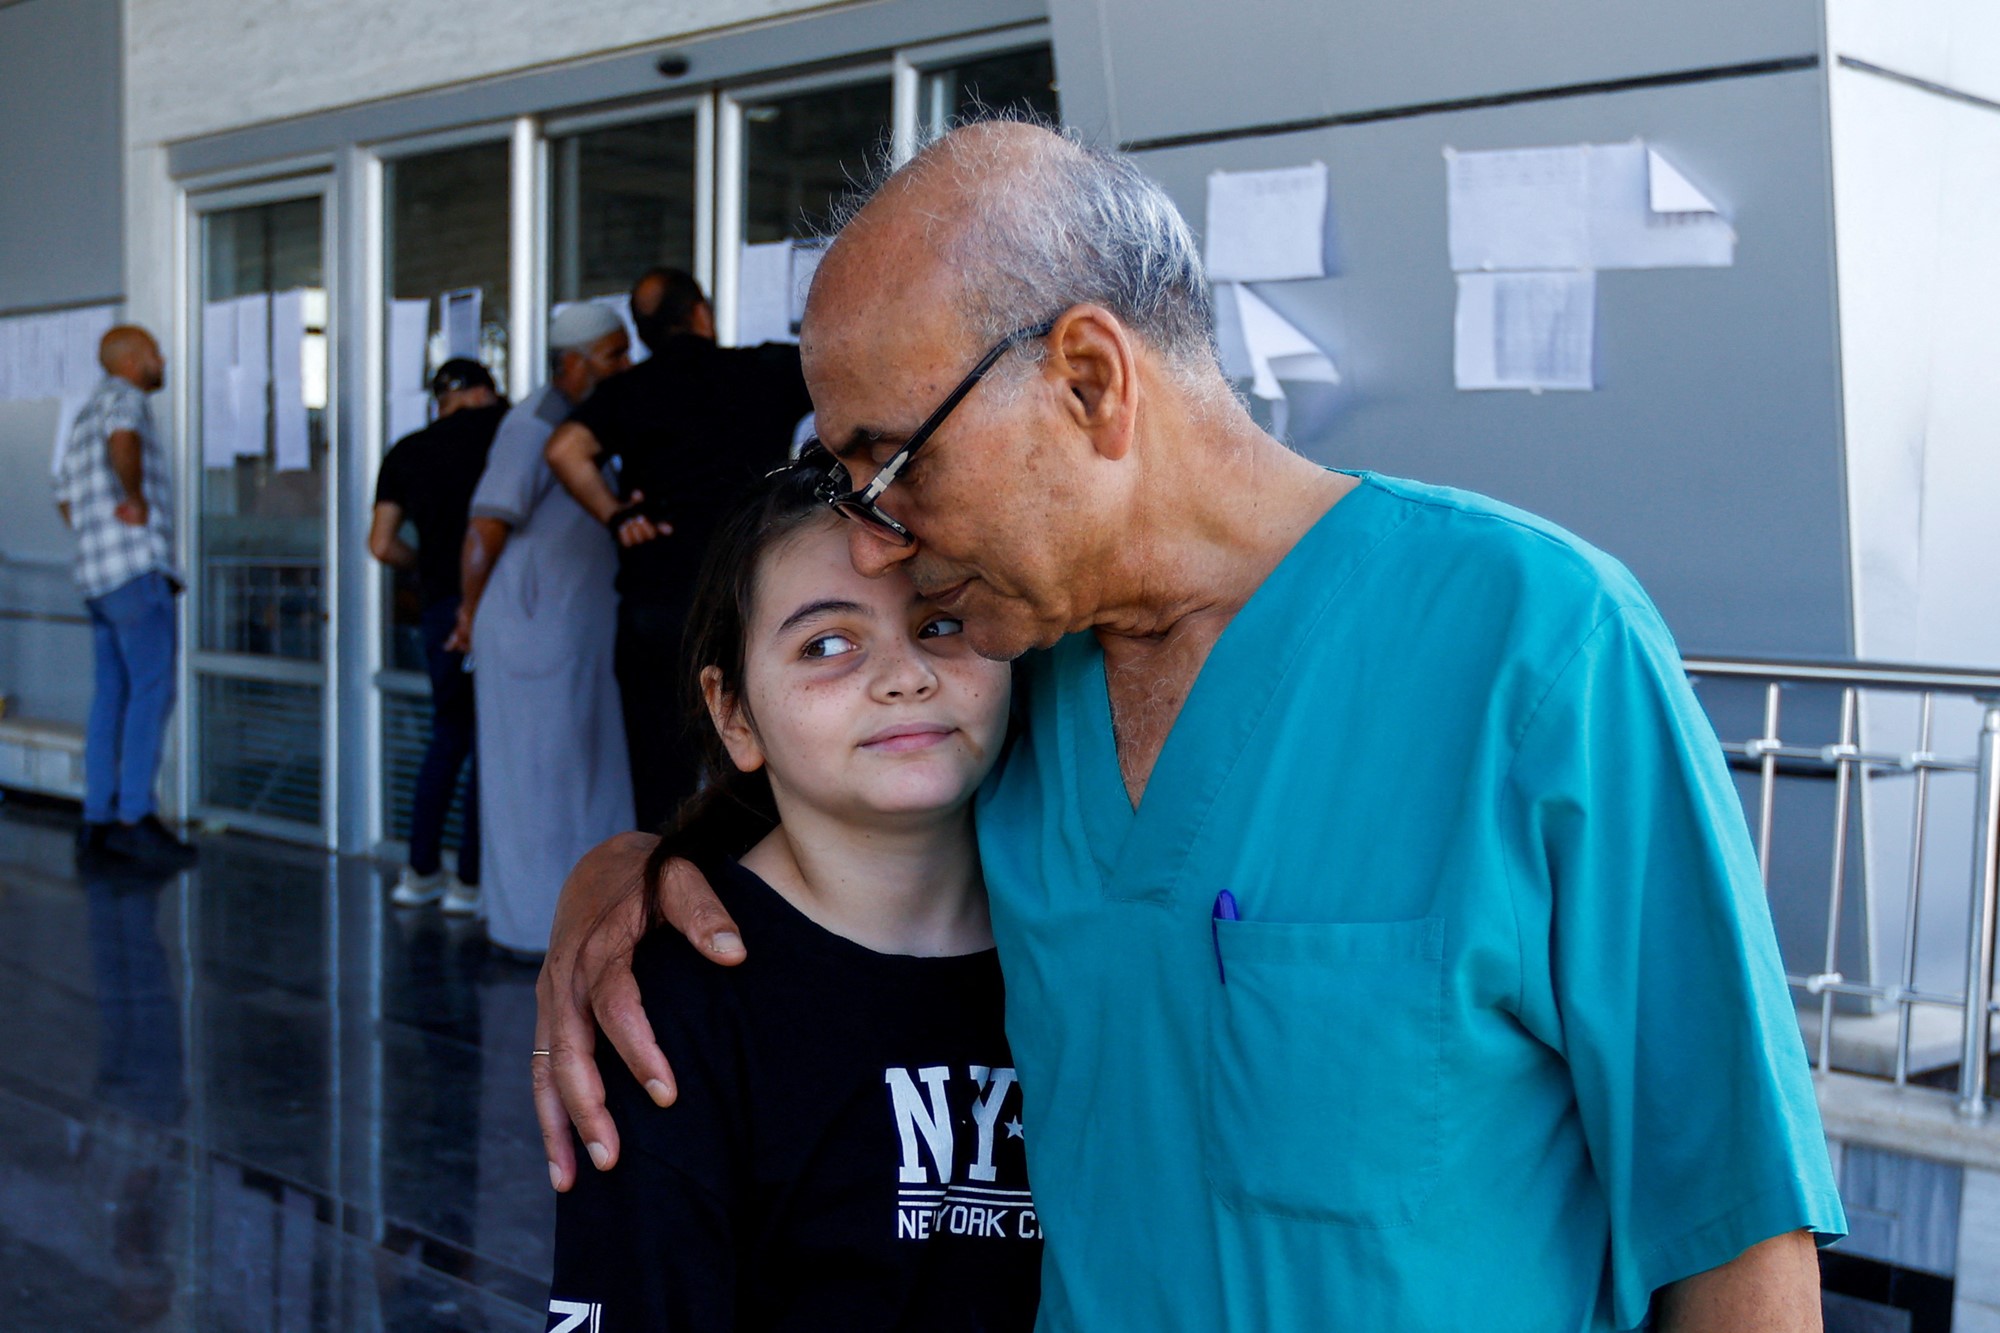 A man wearing doctor's scrubs puts his arm around his daughter